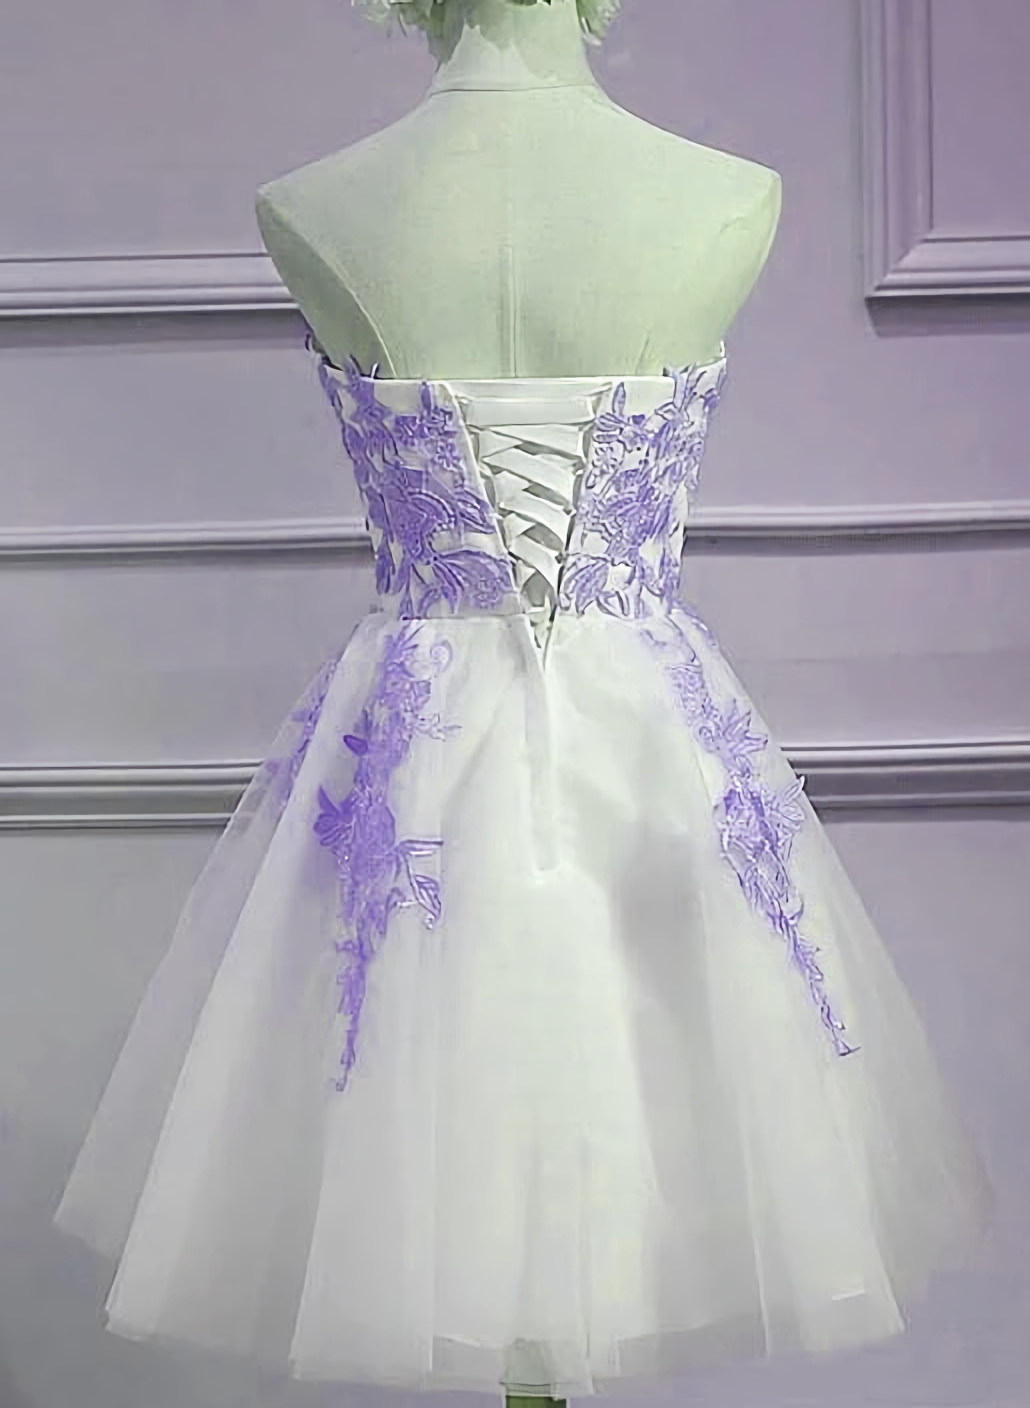 Prom Dress Sale, Lovely Sweetheart White Tulle With Purple Lace Cute Party Homecoming Dress